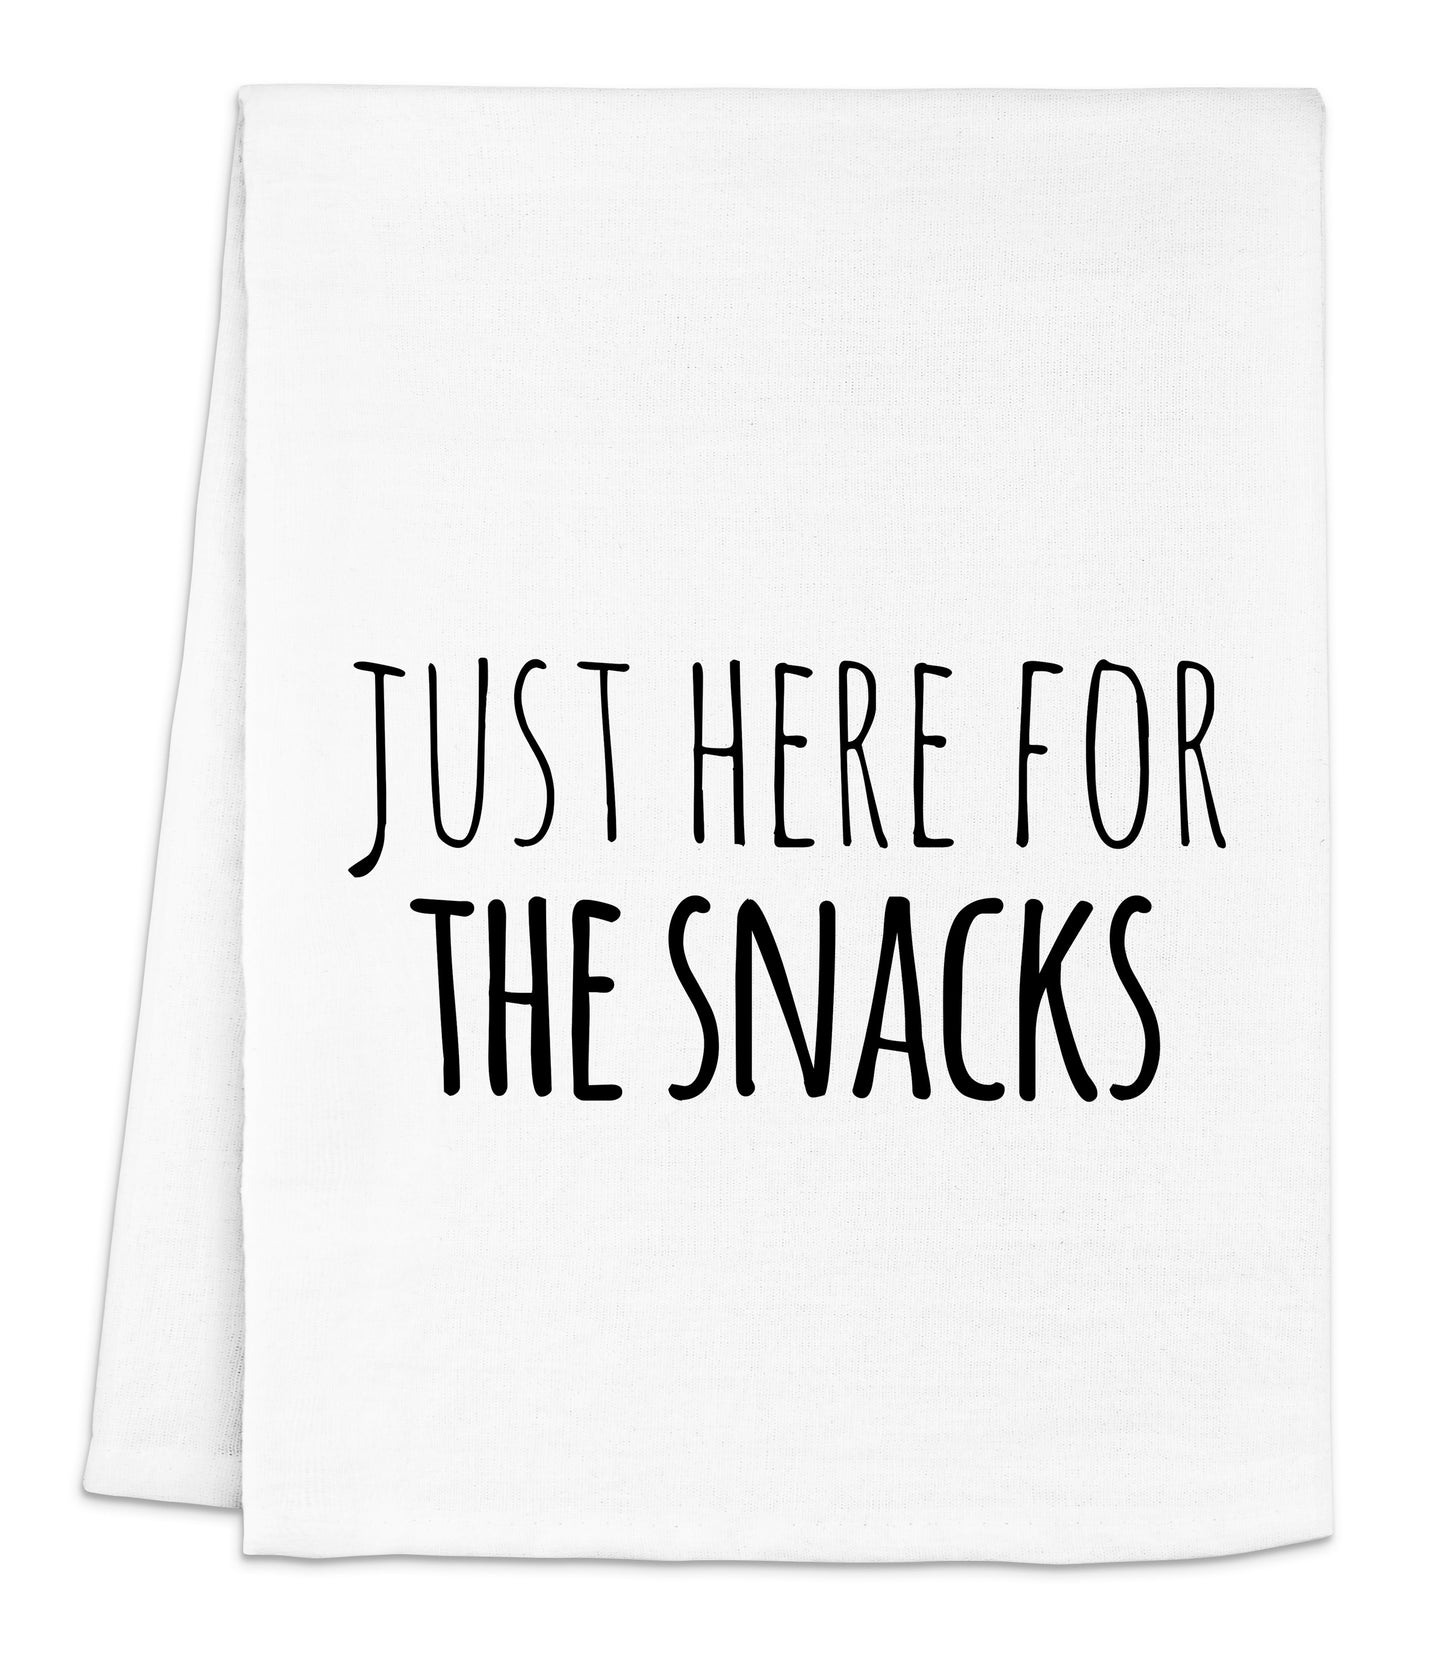 a napkin that says just here for the snacks